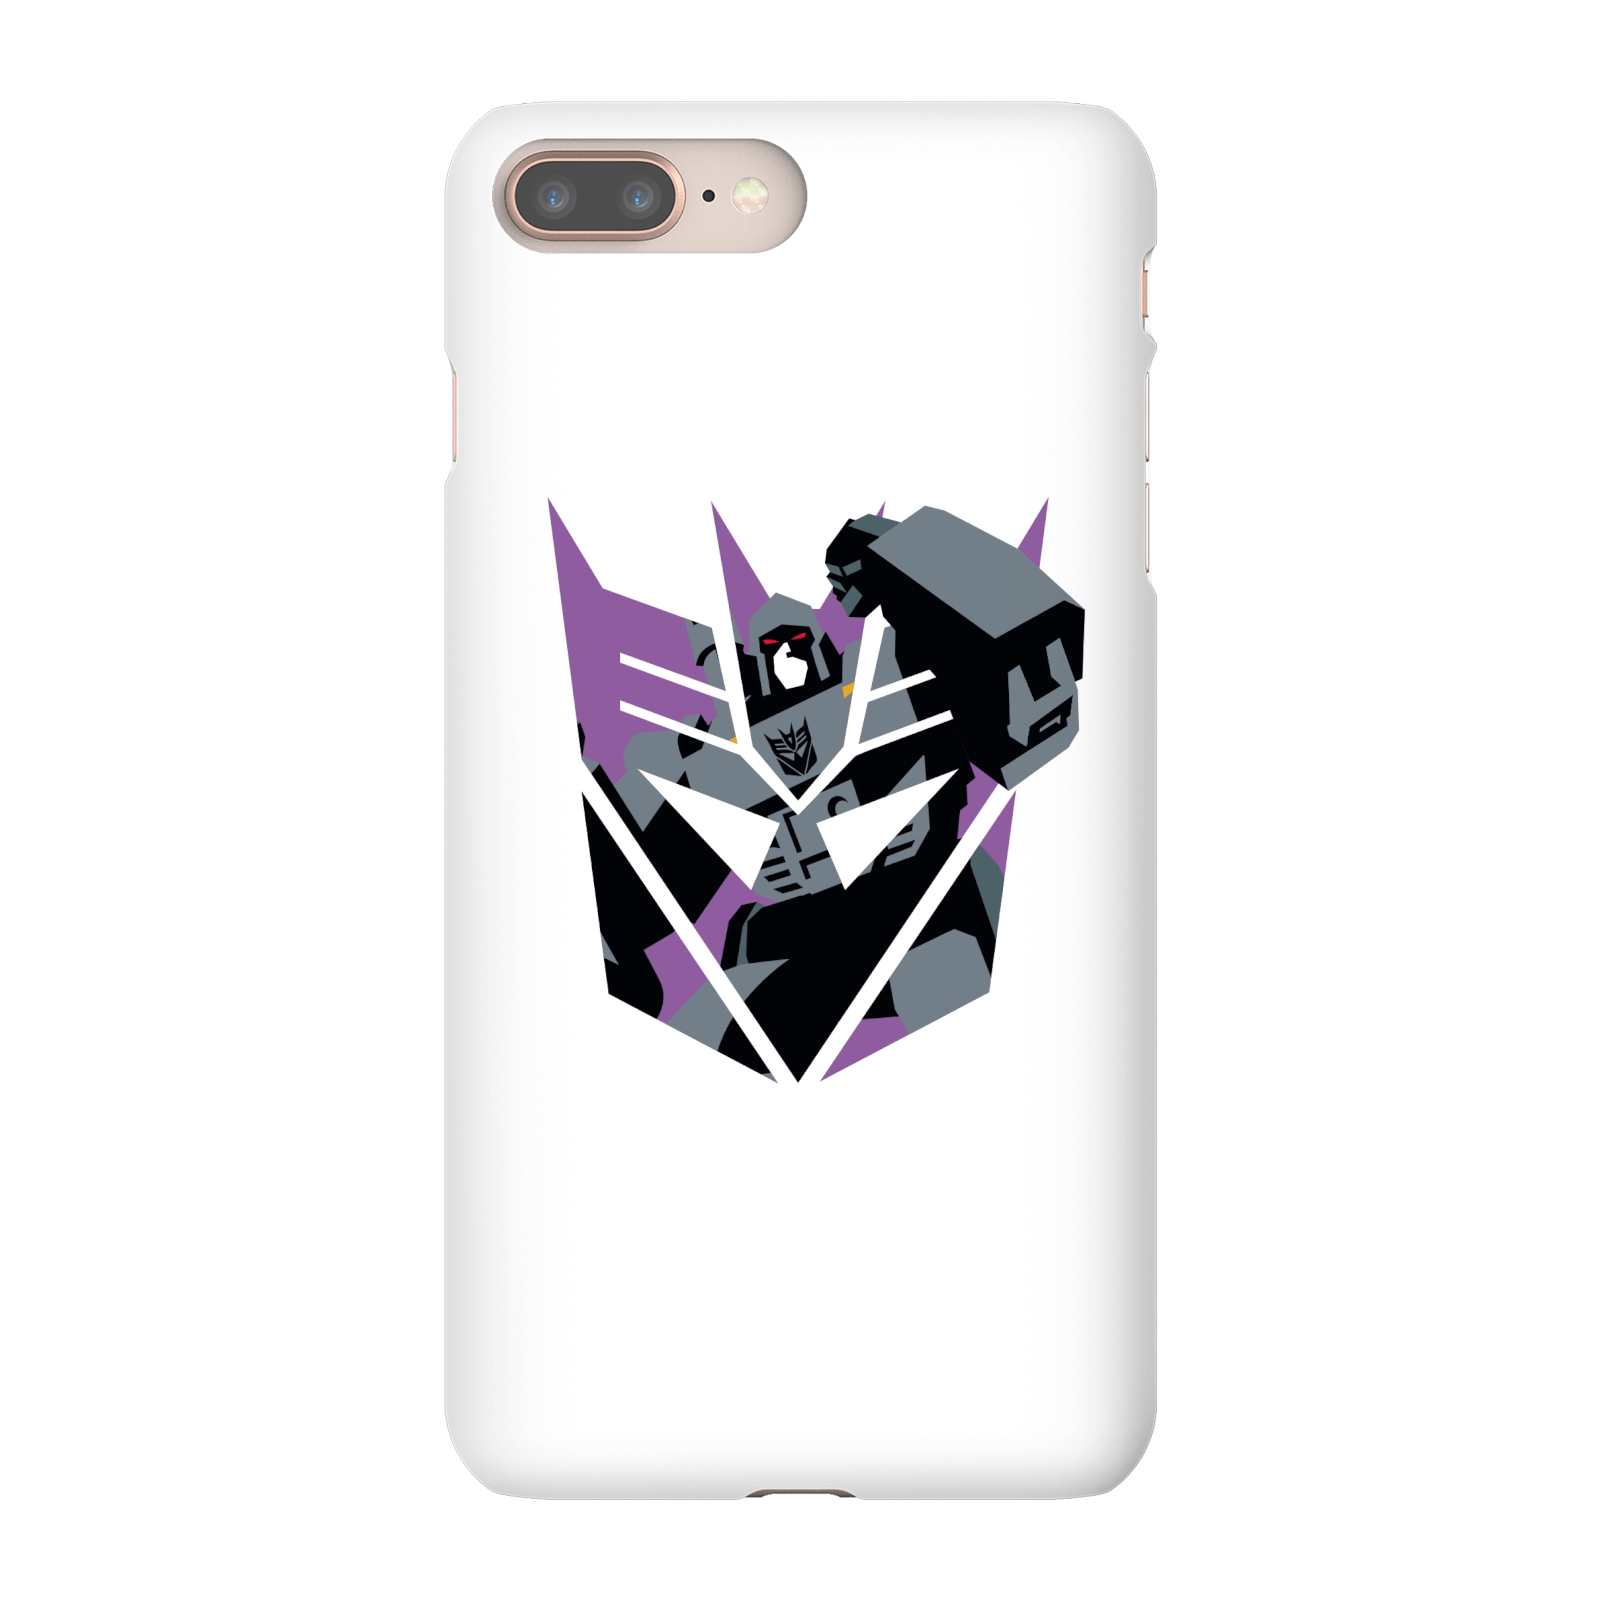 Transformers Decepticon Icon Phone Case for iPhone and Android - iPhone 6S - Snap Case - Matte